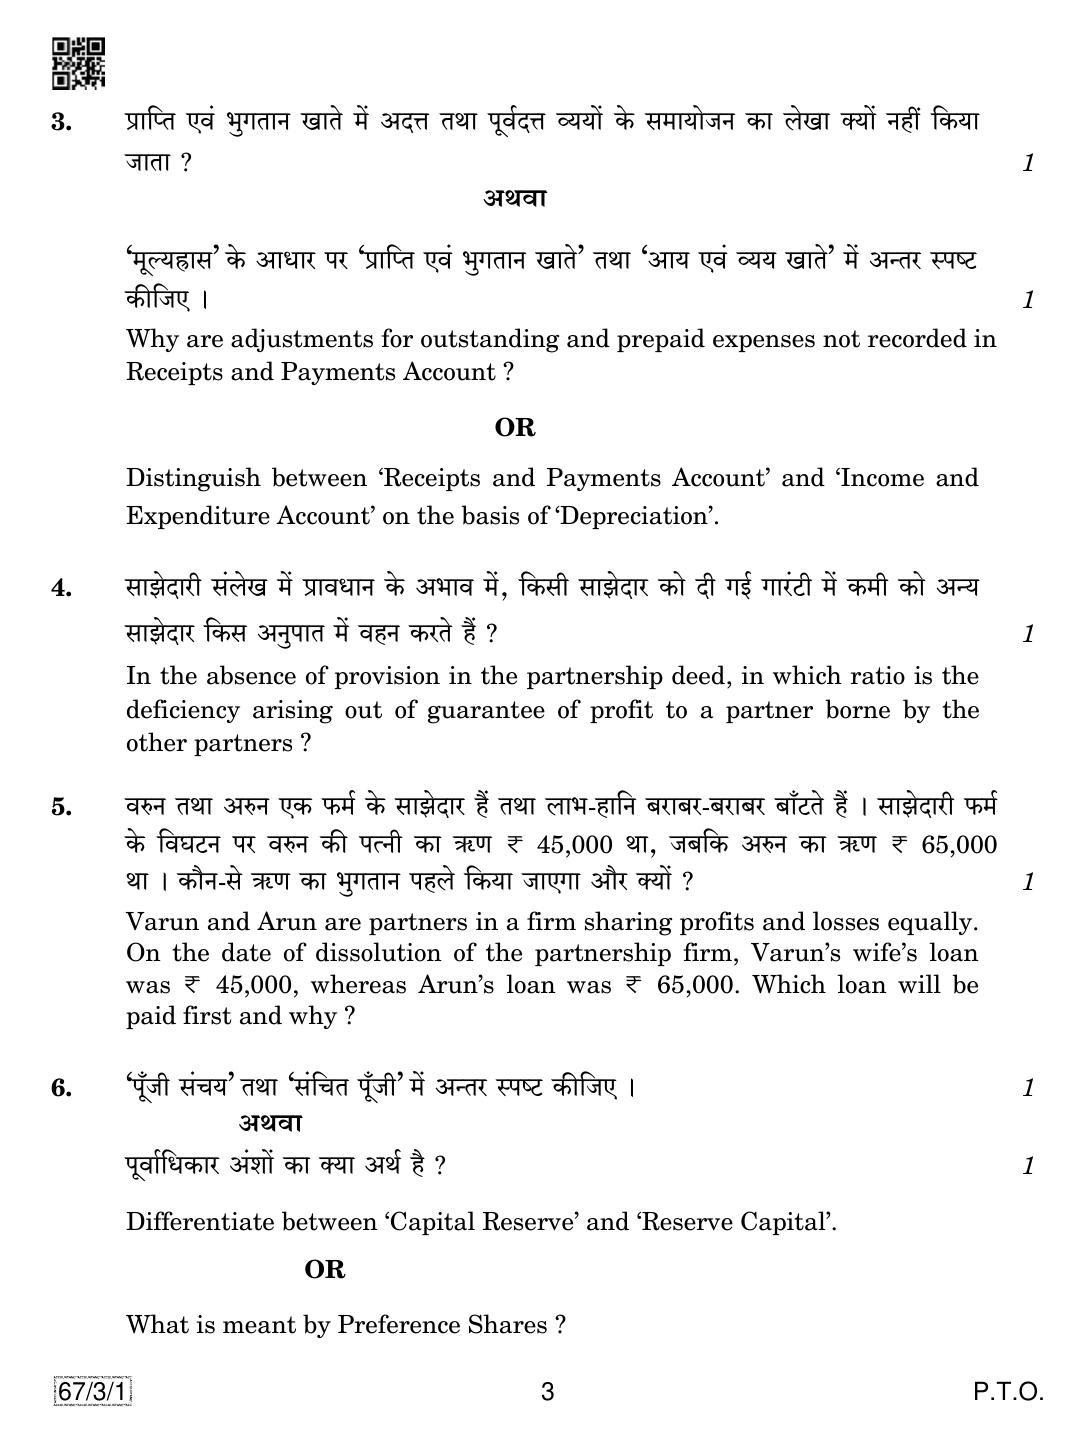 CBSE Class 12 67-3-1 Accountancy 2019 Question Paper - Page 3